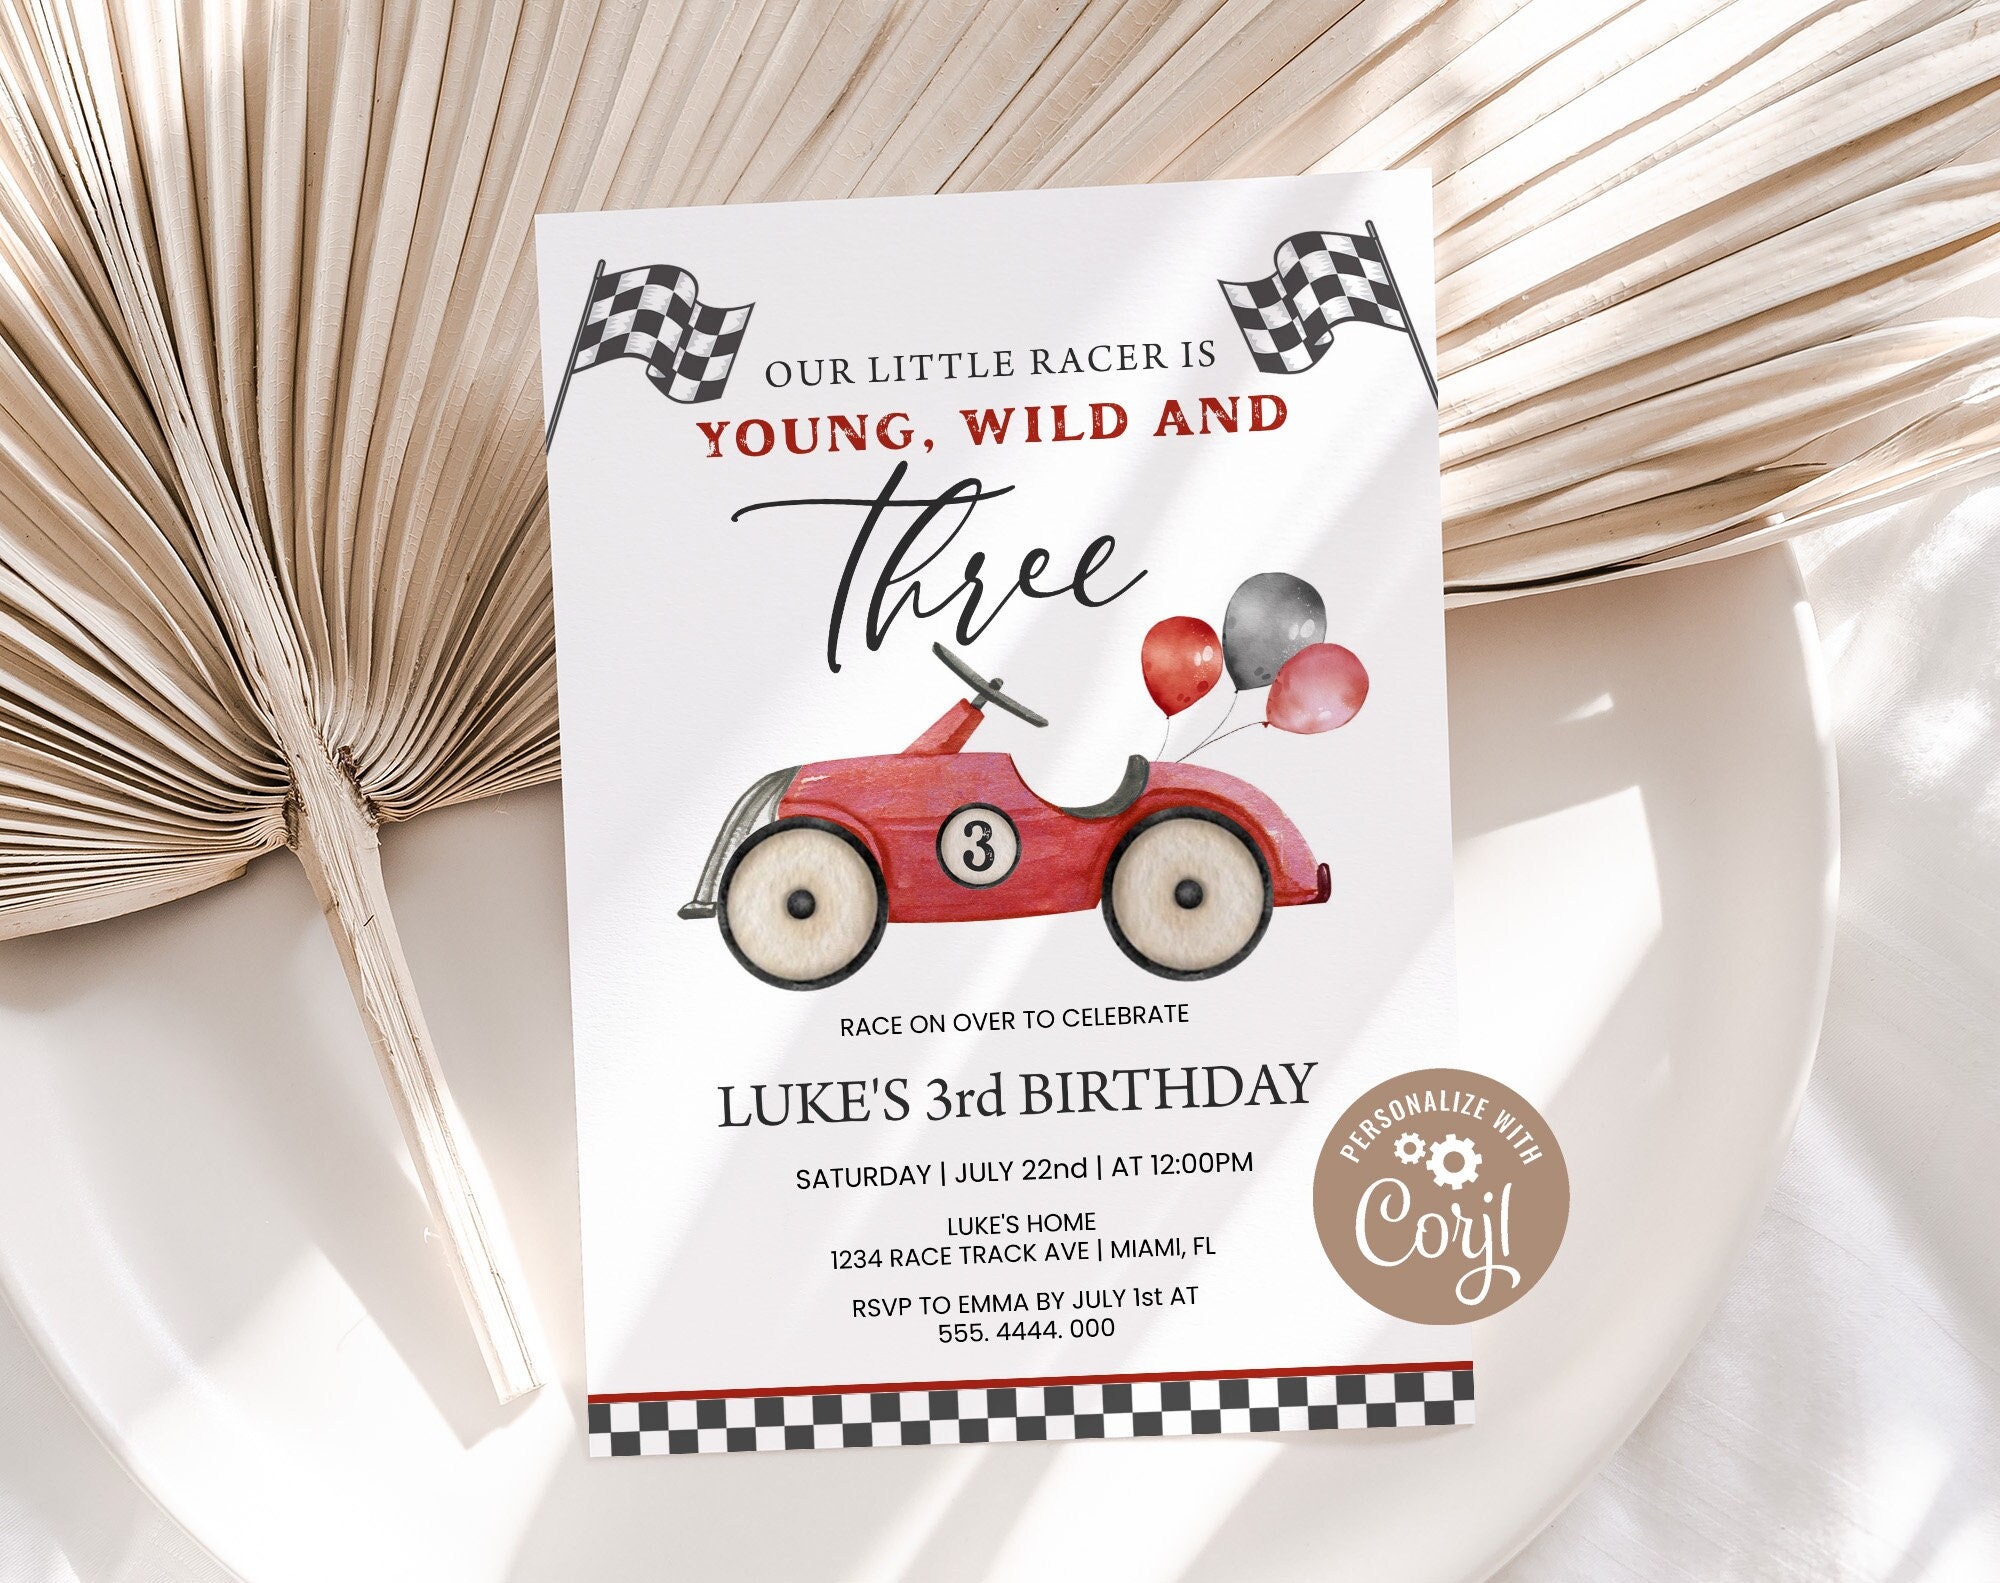 CAN'T CATCH ME, I'M 3! A 3 YEAR OLD'S RACE CAR BIRTHDAY PARTY. – This  Rustic Soul